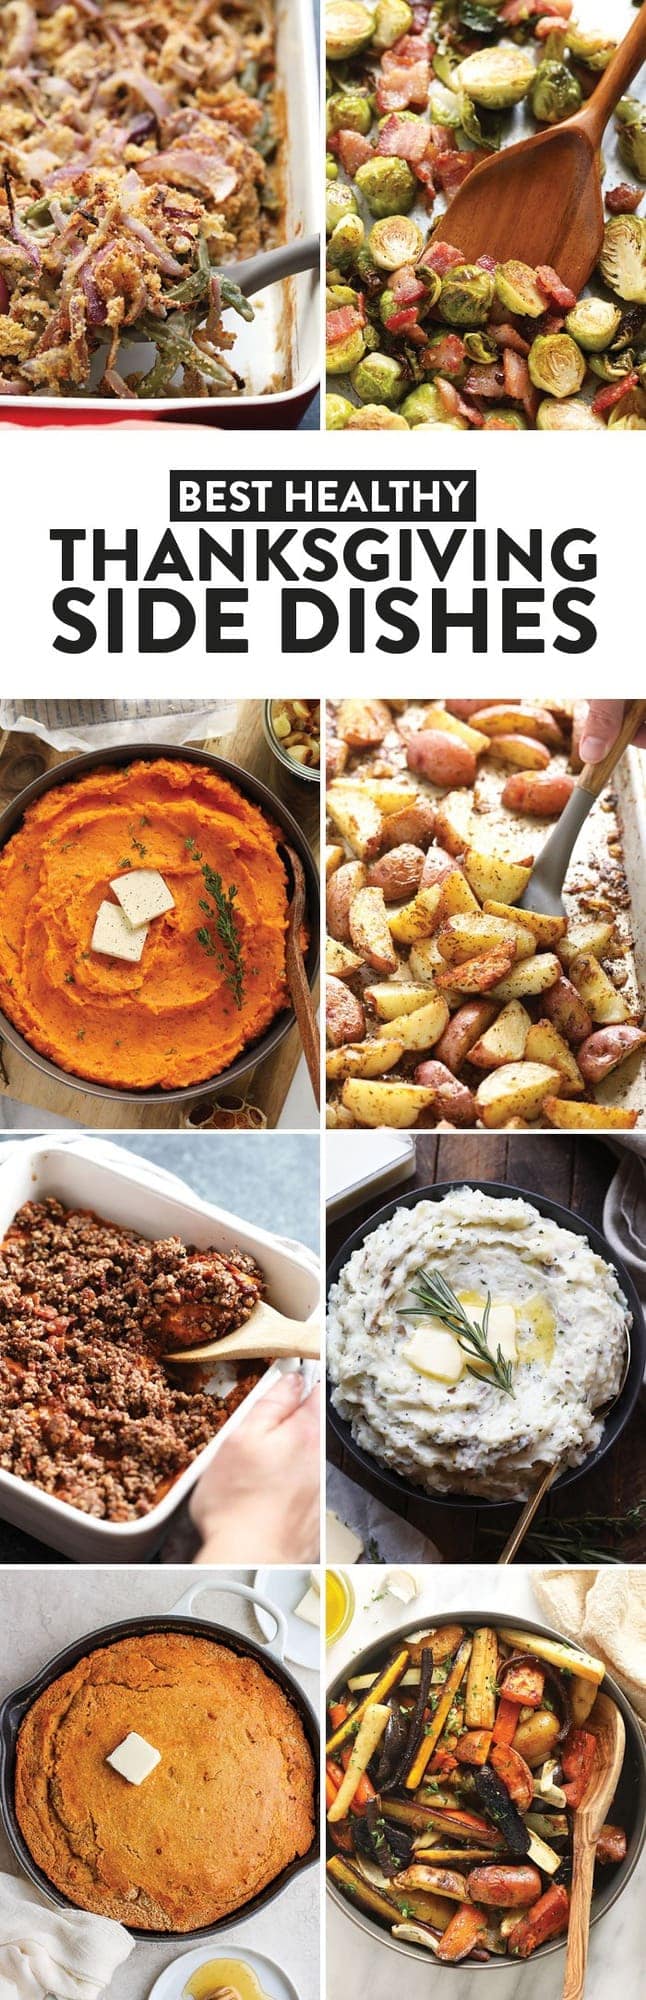 Healthy Thanksgiving Sides (salads, potatoes + more!) - Fit Foodie Finds